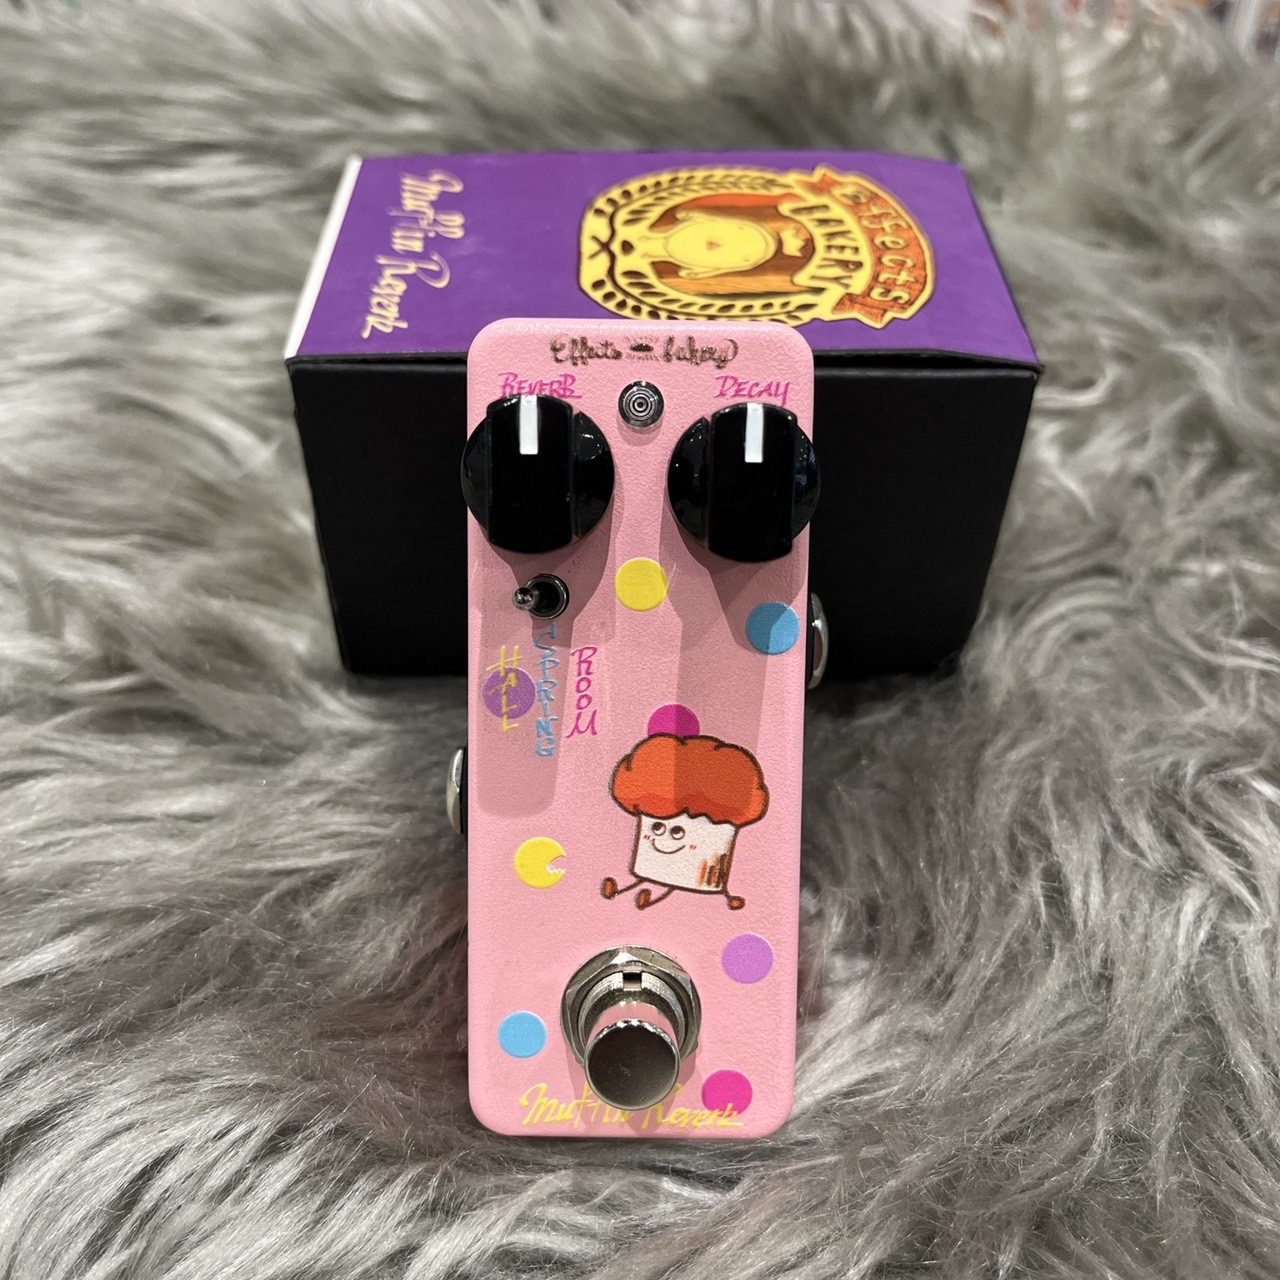 Effects Bakery 【中古】Effects Bakery Muffin Reverb エフェクツ 